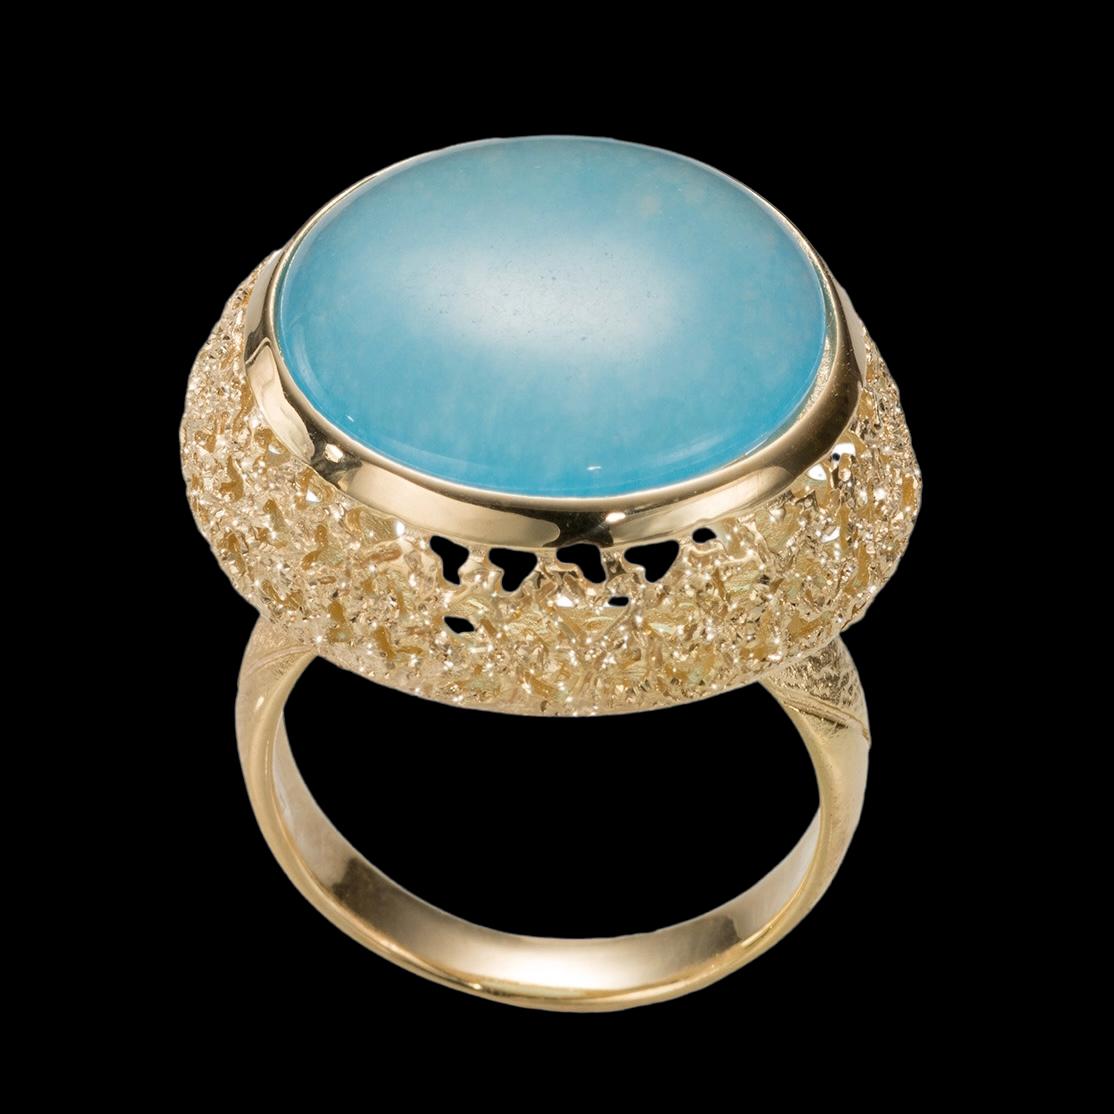 Crafted gold plated ring with a blue quartz stone